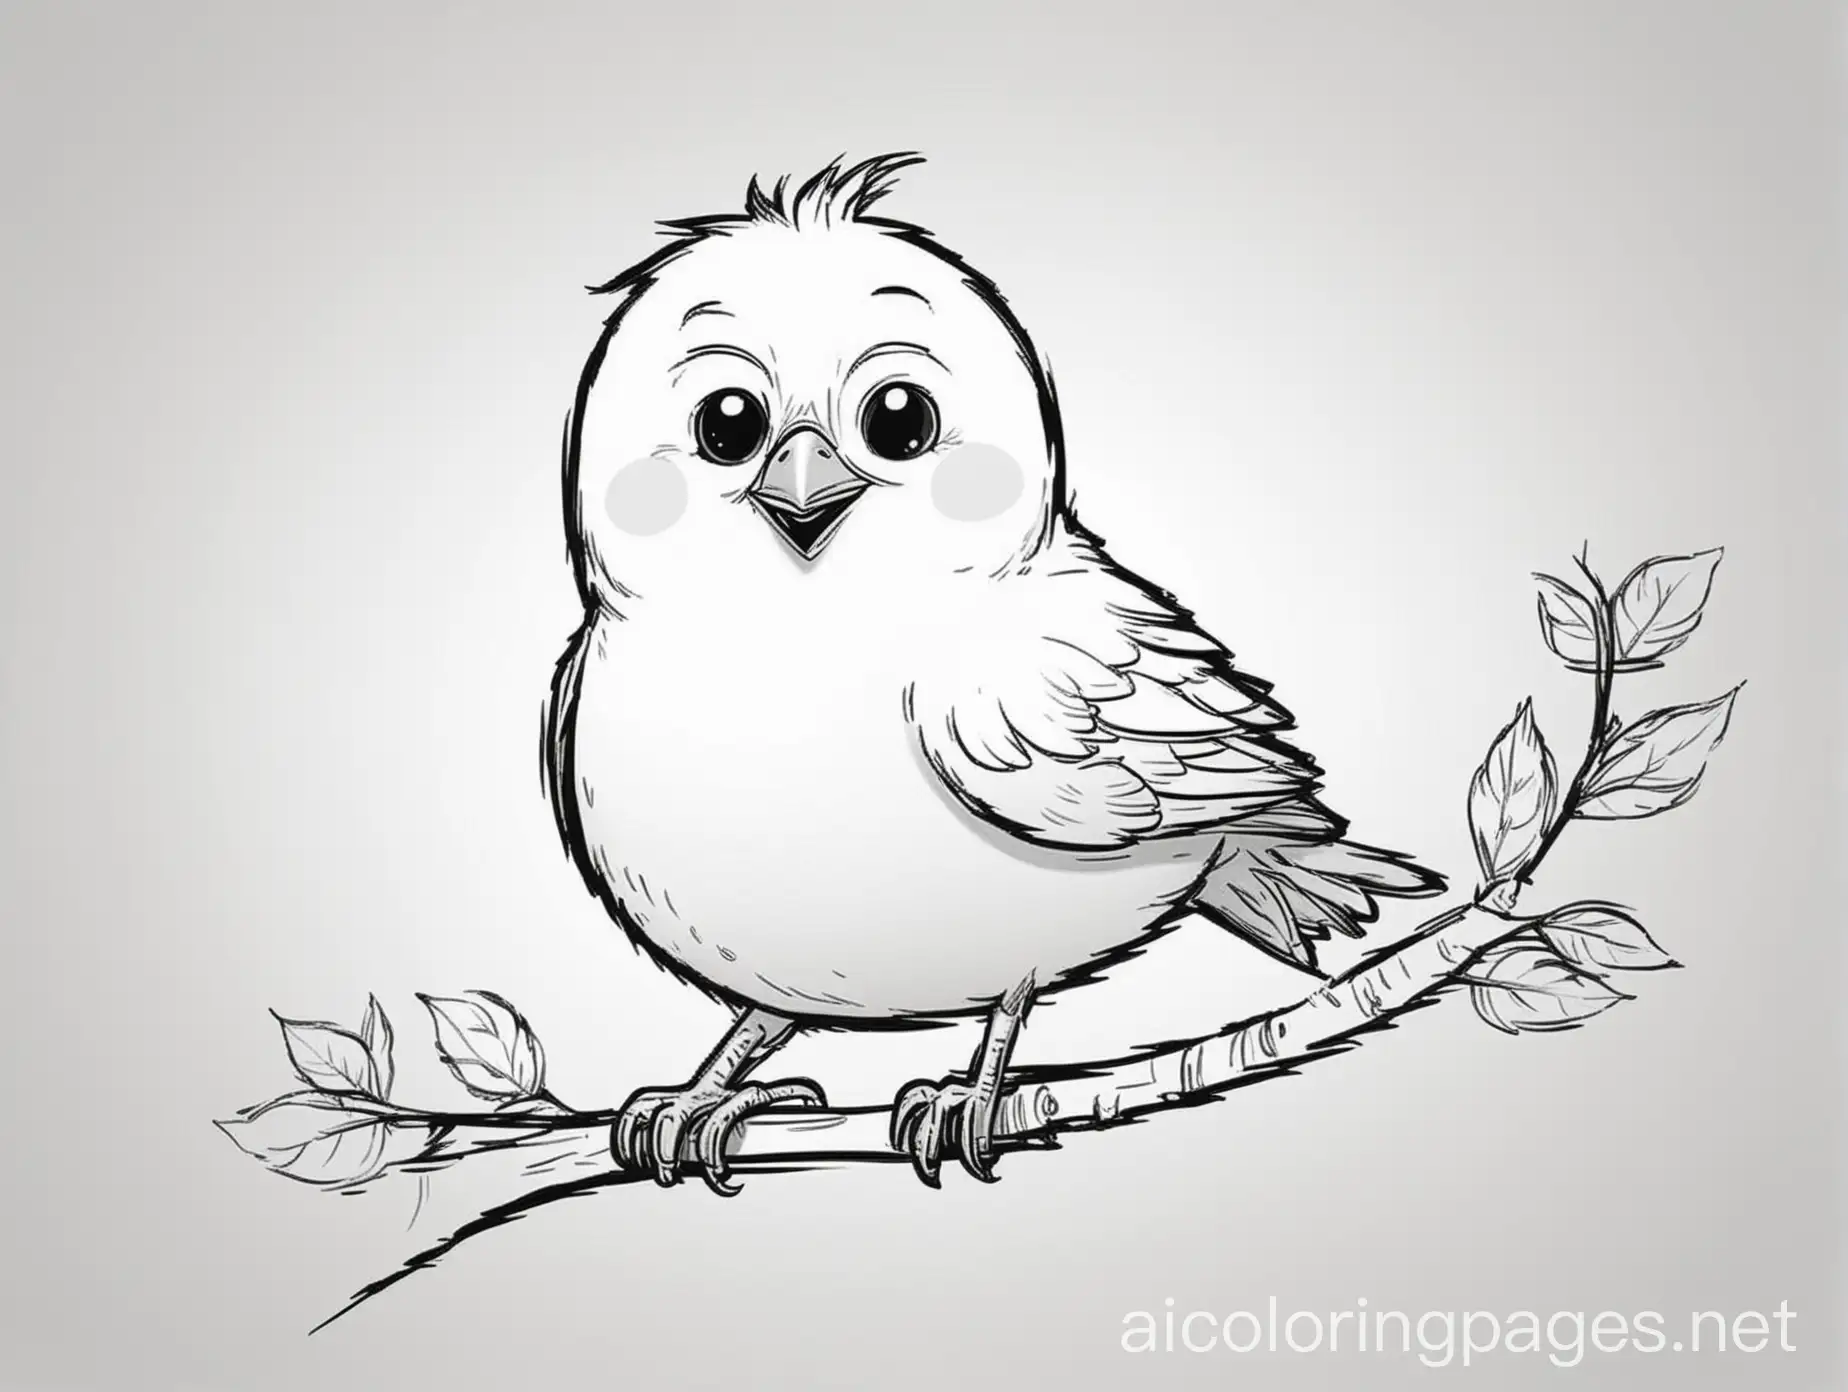 happy cartoon bird, Coloring Page, black and white, line art, white background, Simplicity, Ample White Space. The background of the coloring page is plain white to make it easy for young children to color within the lines. The outlines of all the subjects are easy to distinguish, making it simple for kids to color without too much difficulty